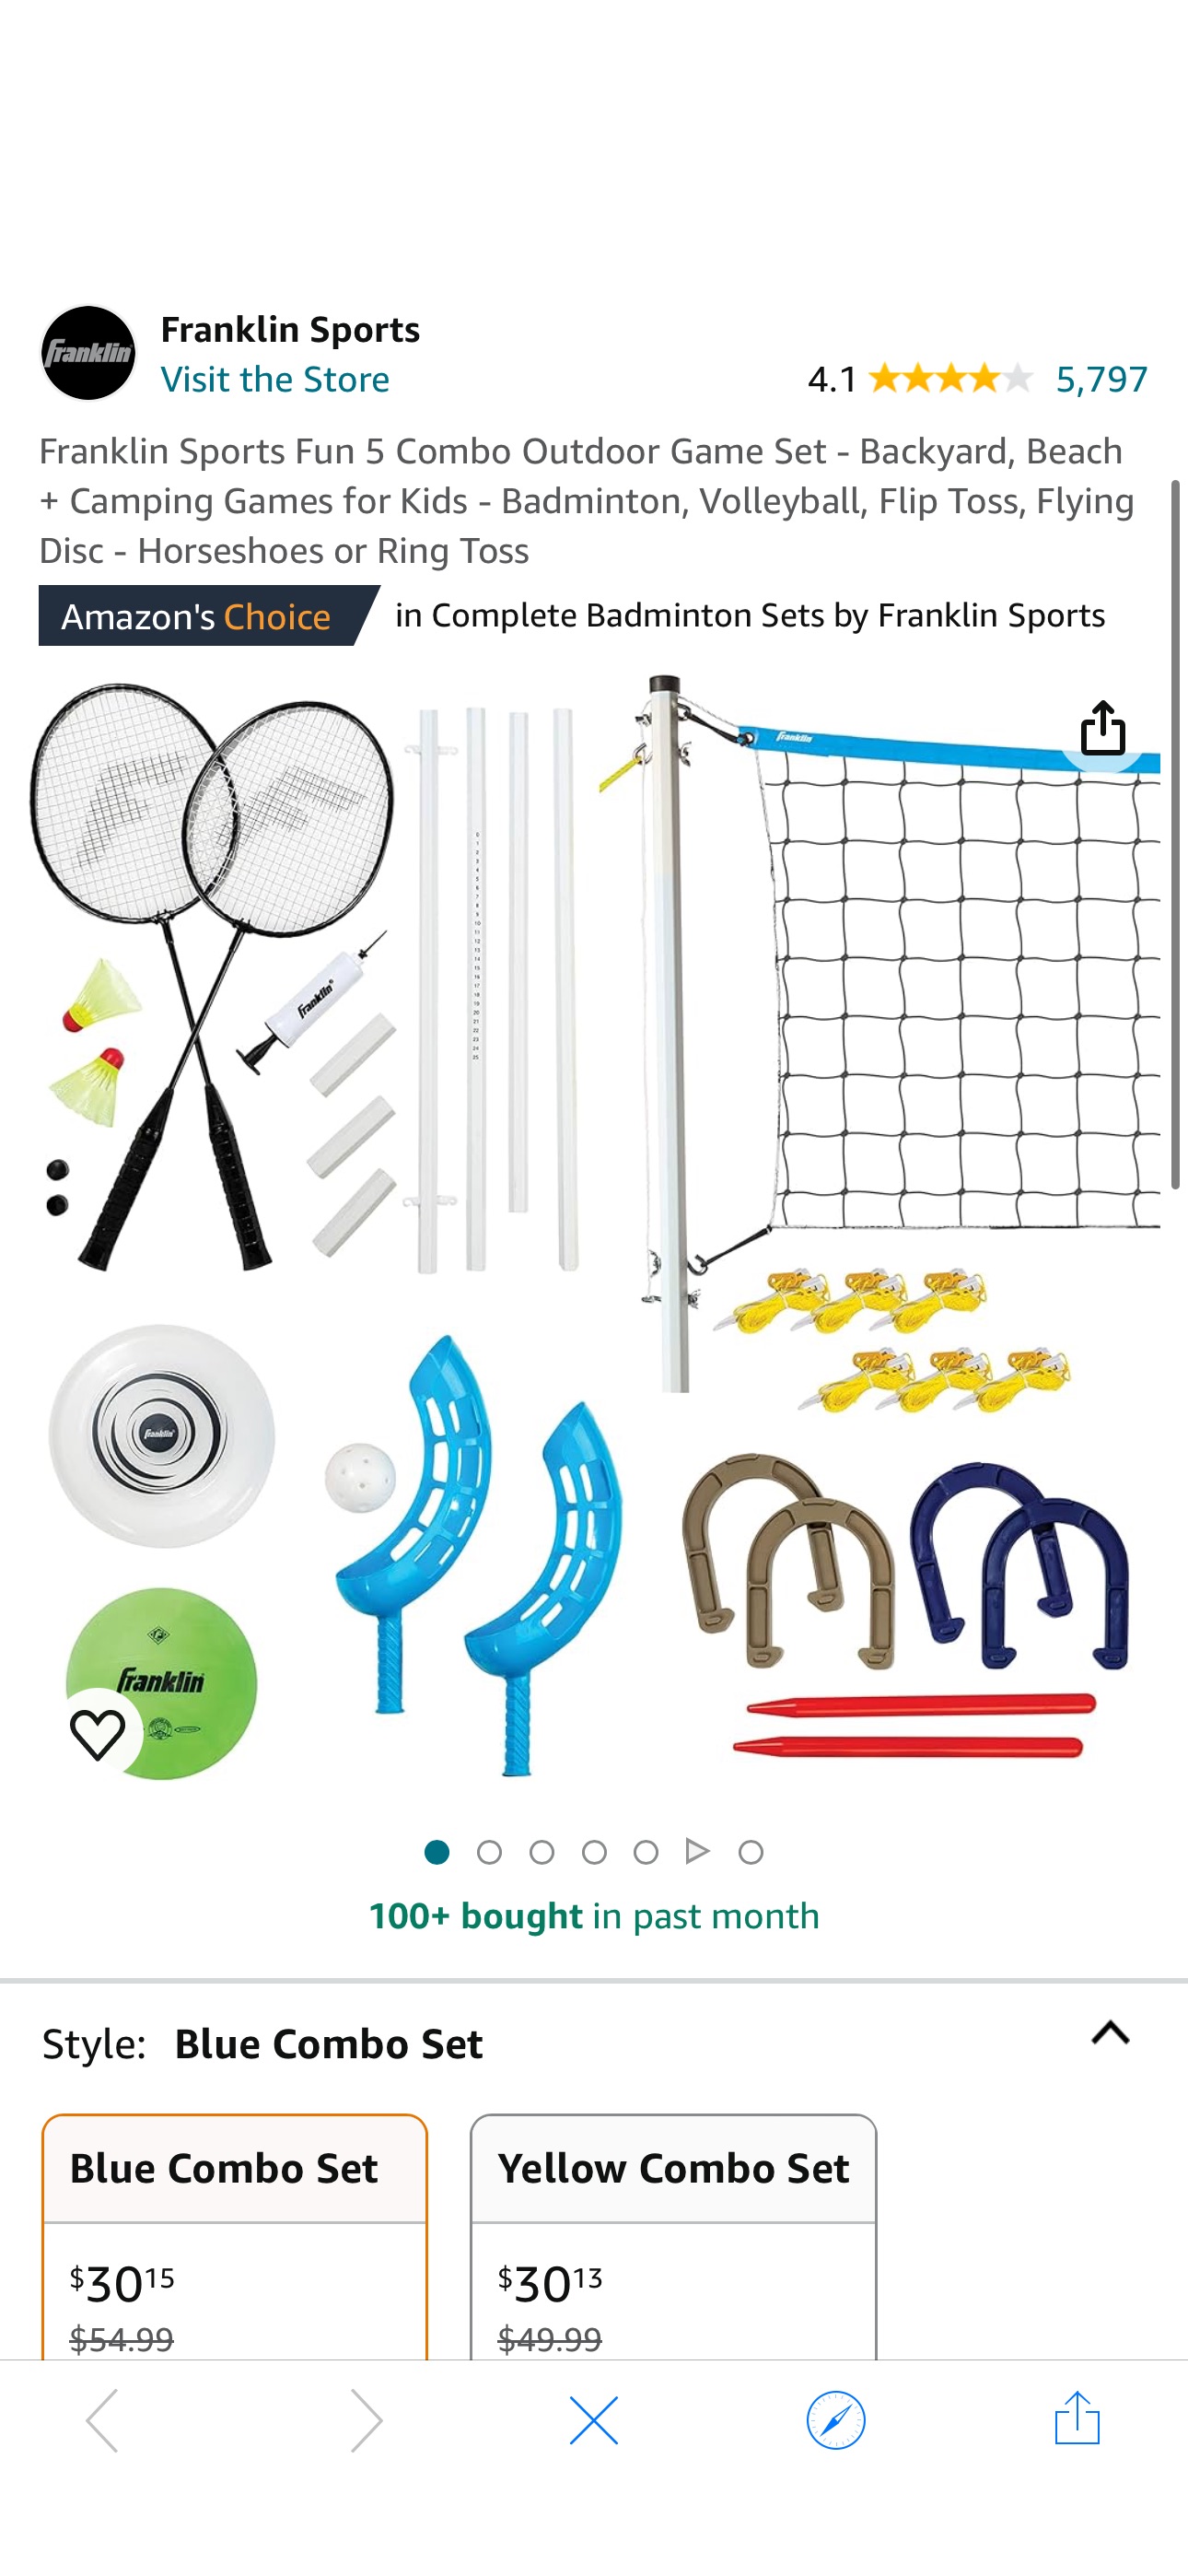 Amazon.com : Franklin Sports Fun 5 Combo Outdoor Game Set - Backyard, Beach + Camping Games for Kids - Badminton, Volleyball, Flip Toss, Flying Disc - Horseshoes or Ring Toss : General Sporting Equipm